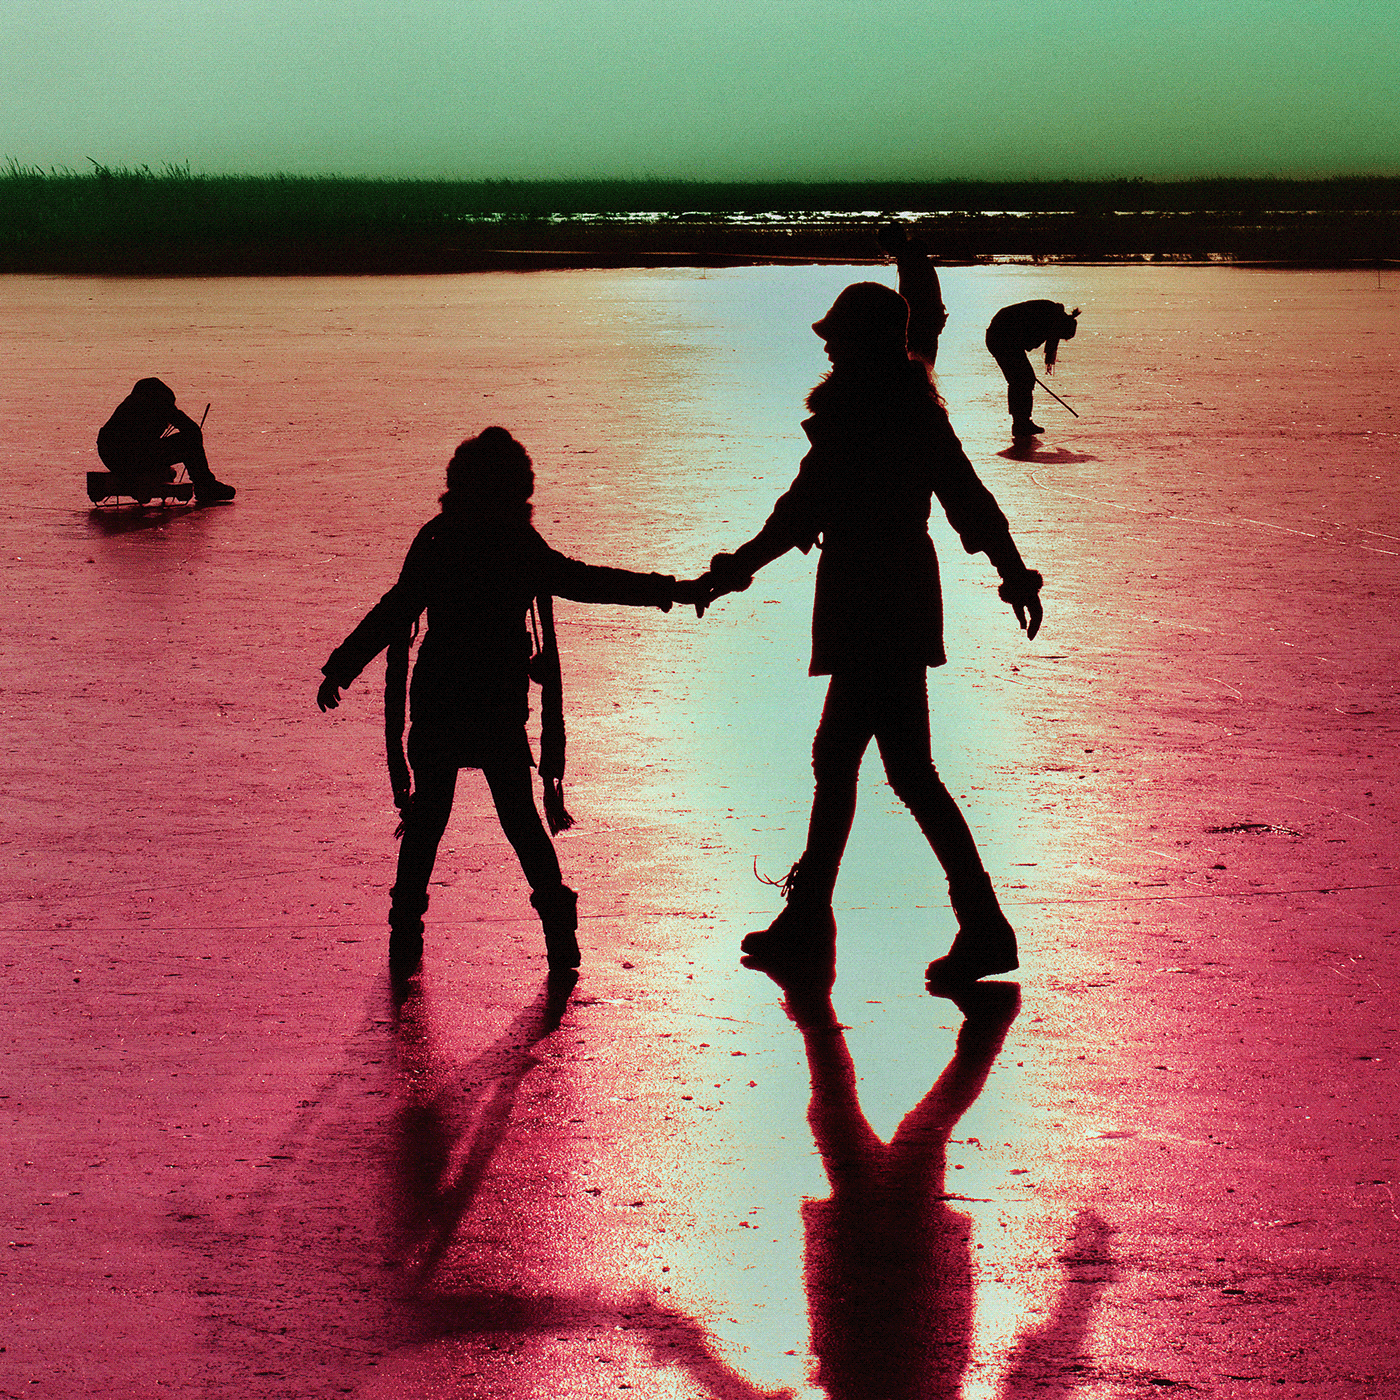 "Frozen Lake" is the colored image for the alternative process.
The location is Ayding Lake, China.